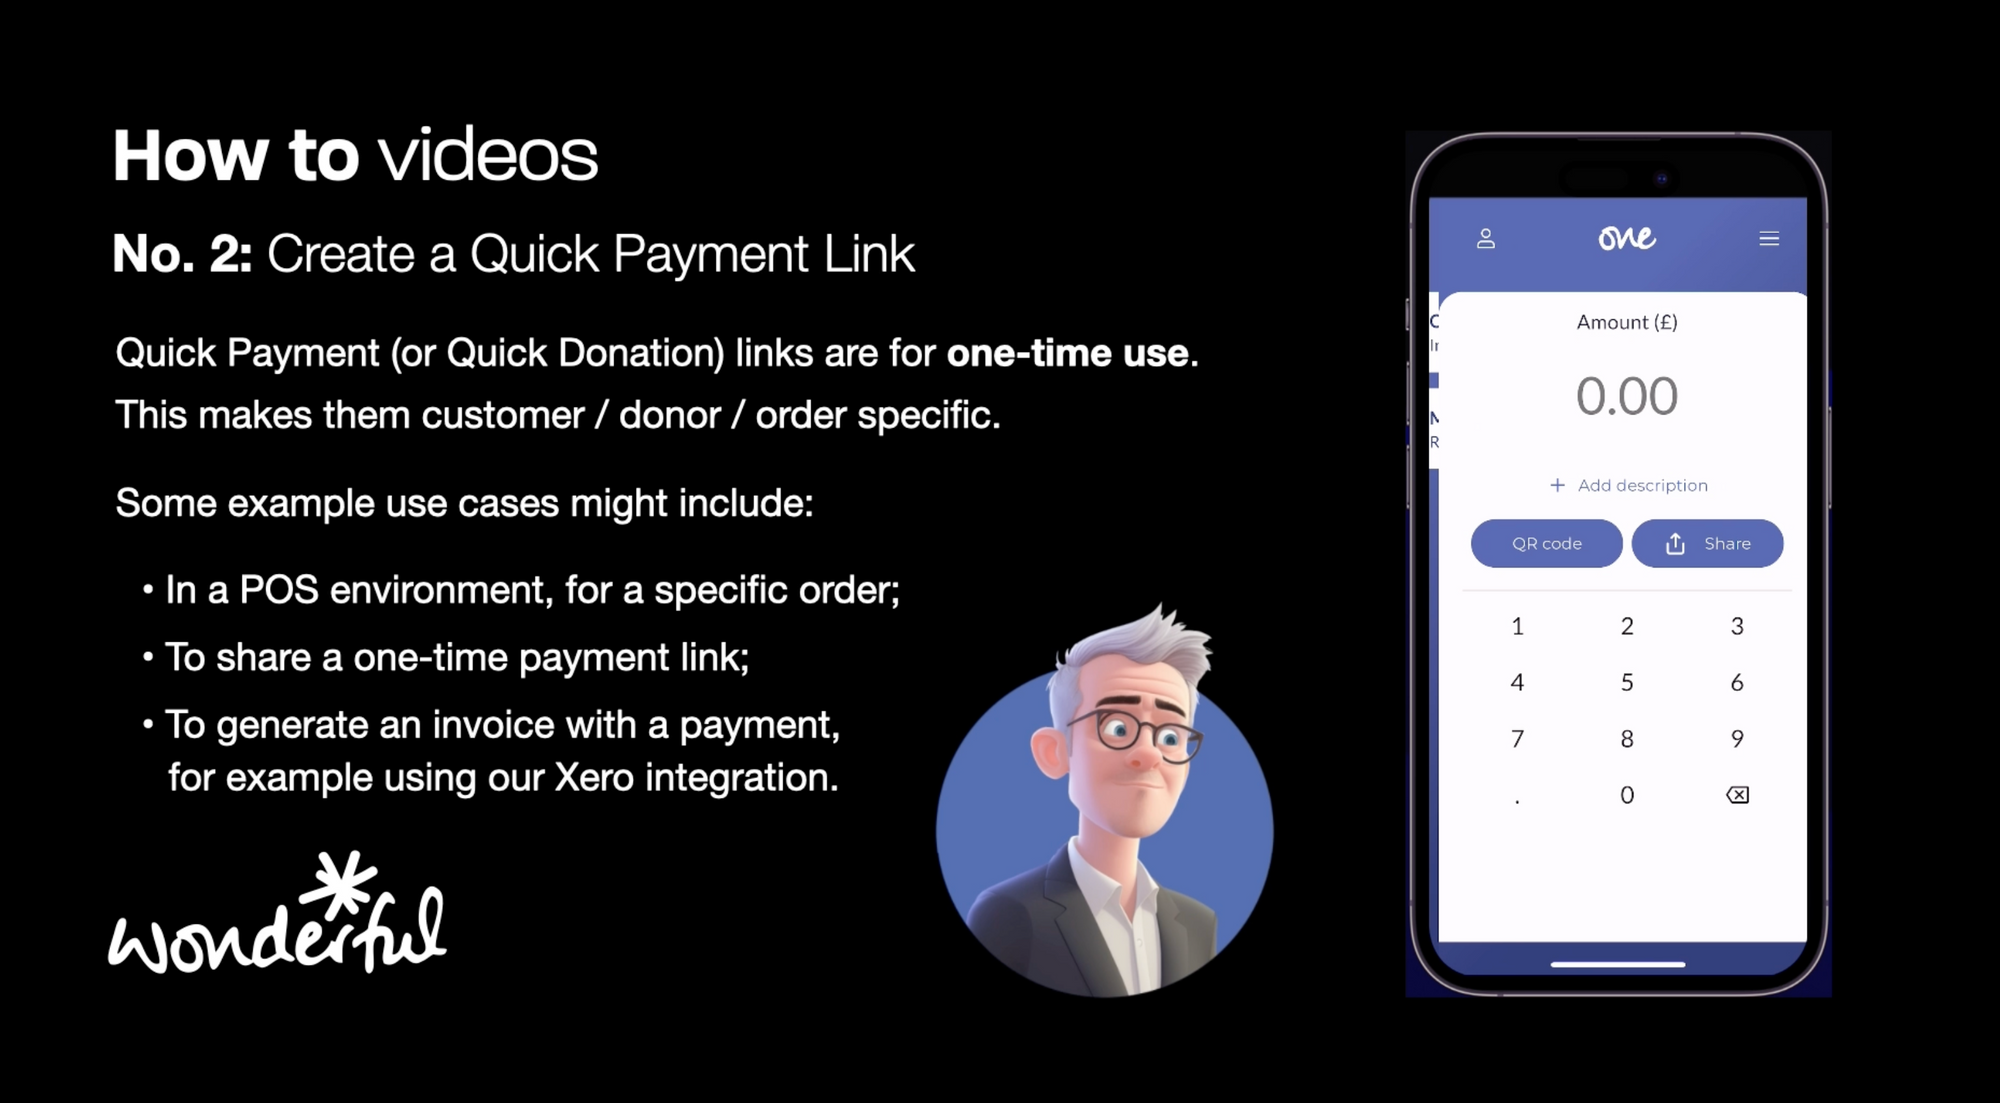 Create a Quick Payment / Quick Donation